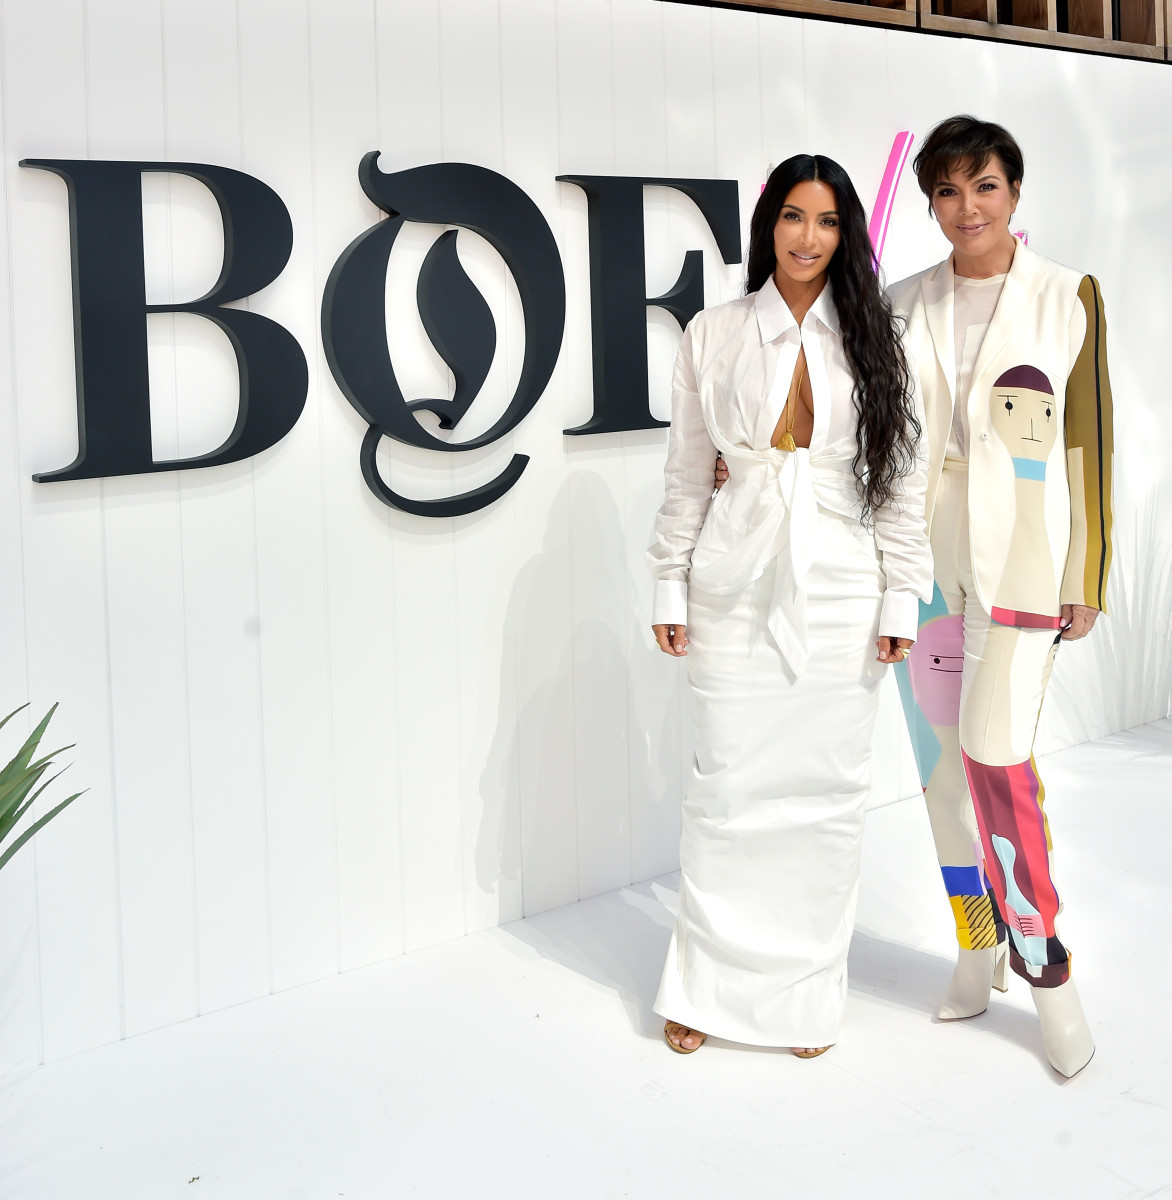 Kim Kardashian and Kris Jenner at BoF West. Photo: Stefanie Keenan/Getty Images for The Business of Fashion